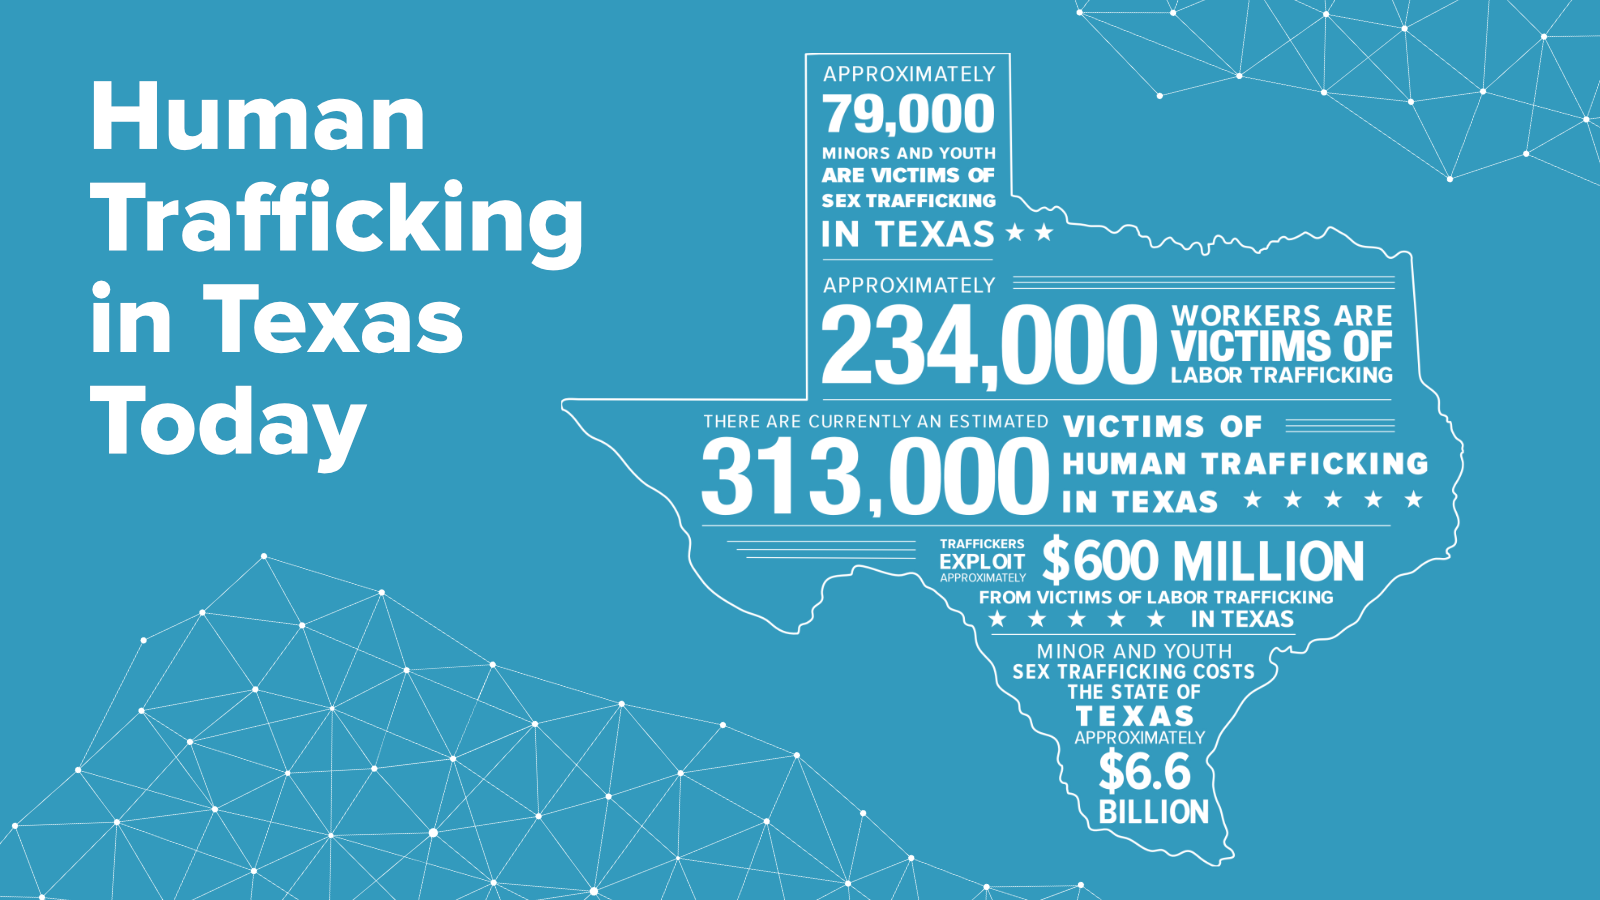 Human Trafficking by the Numbers report from the state of Texas